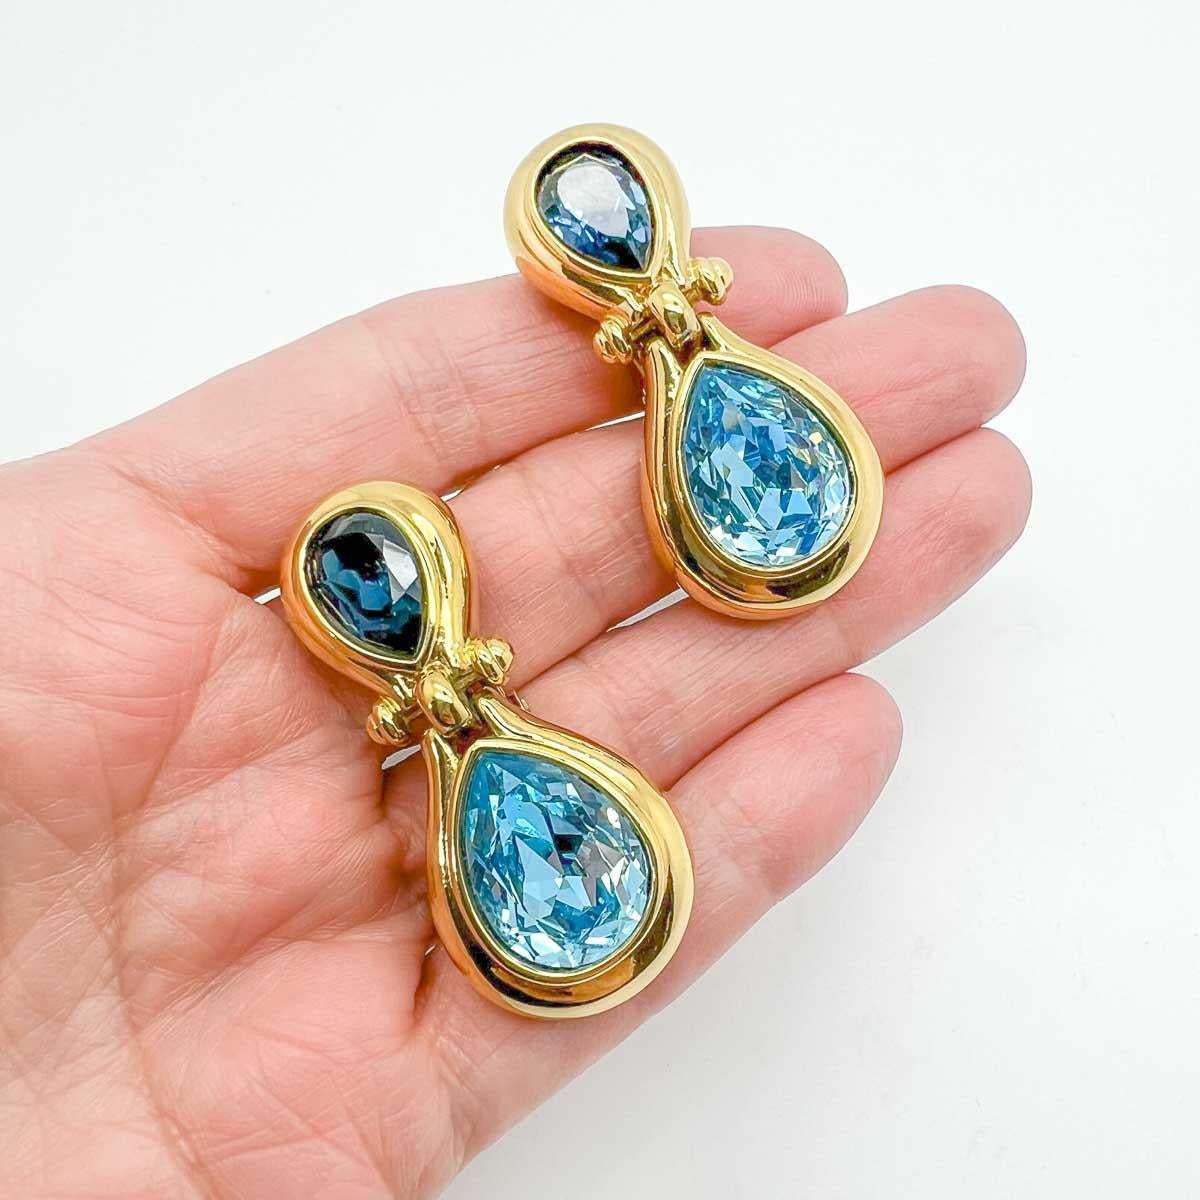 Vintage Grosse Sapphire Earrings featuring sapphire and aqua crystals in fancy cuts. A perfectly feminine earring that will transcend the decades with total style and class.
From modernist to centuries old styles, premiere German costume jewellers